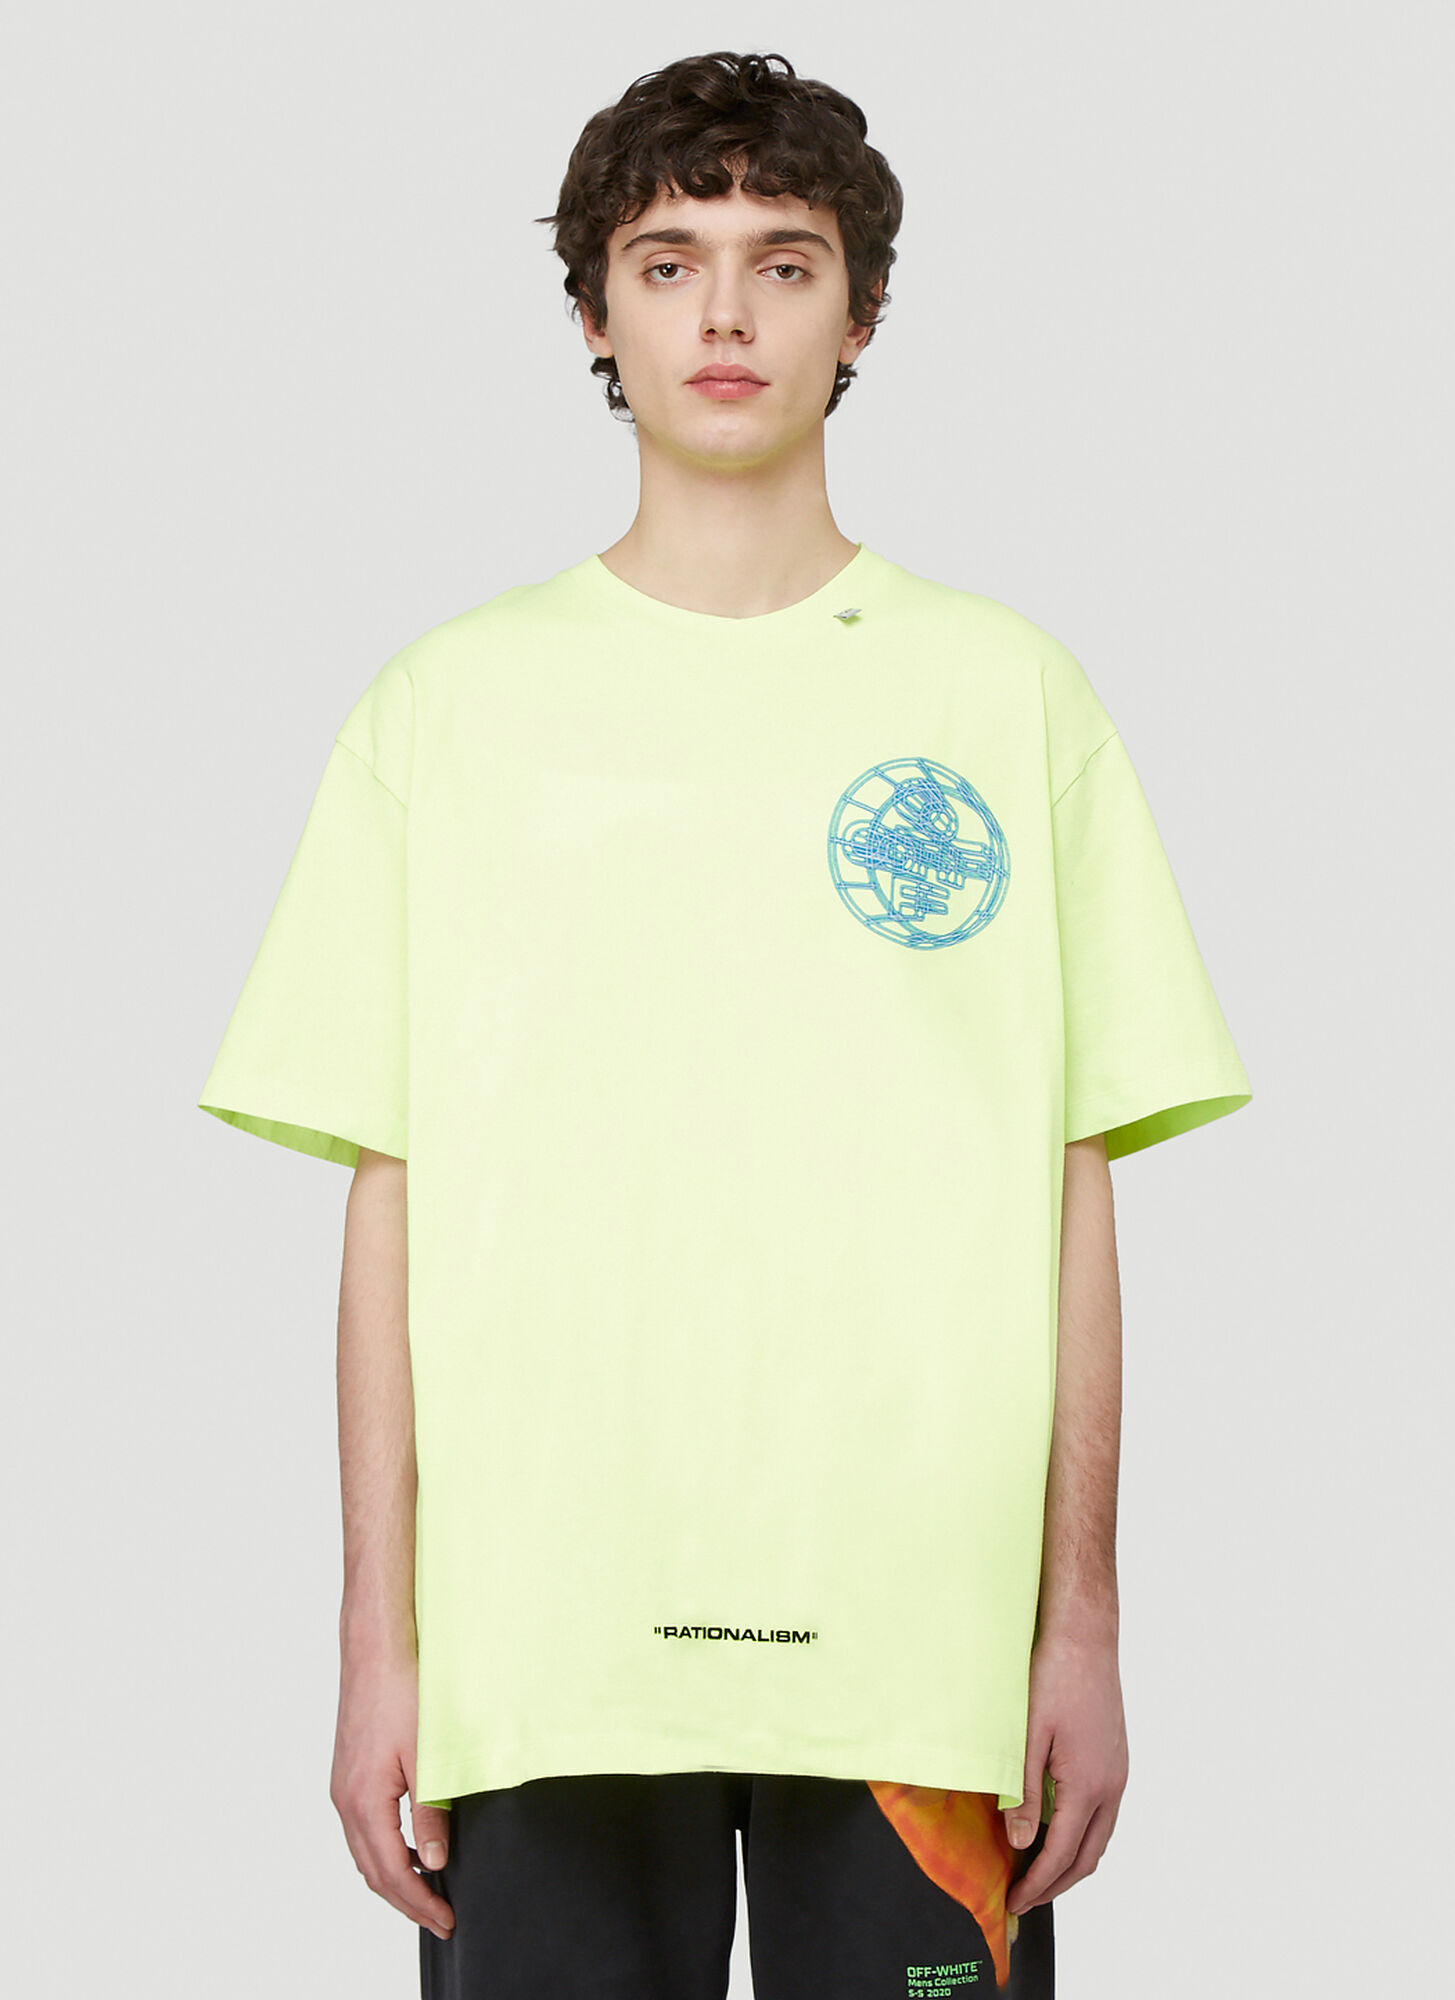 Off-White “Rationalism” Fluorescent T-Shirt in Yellow size XS | The ...